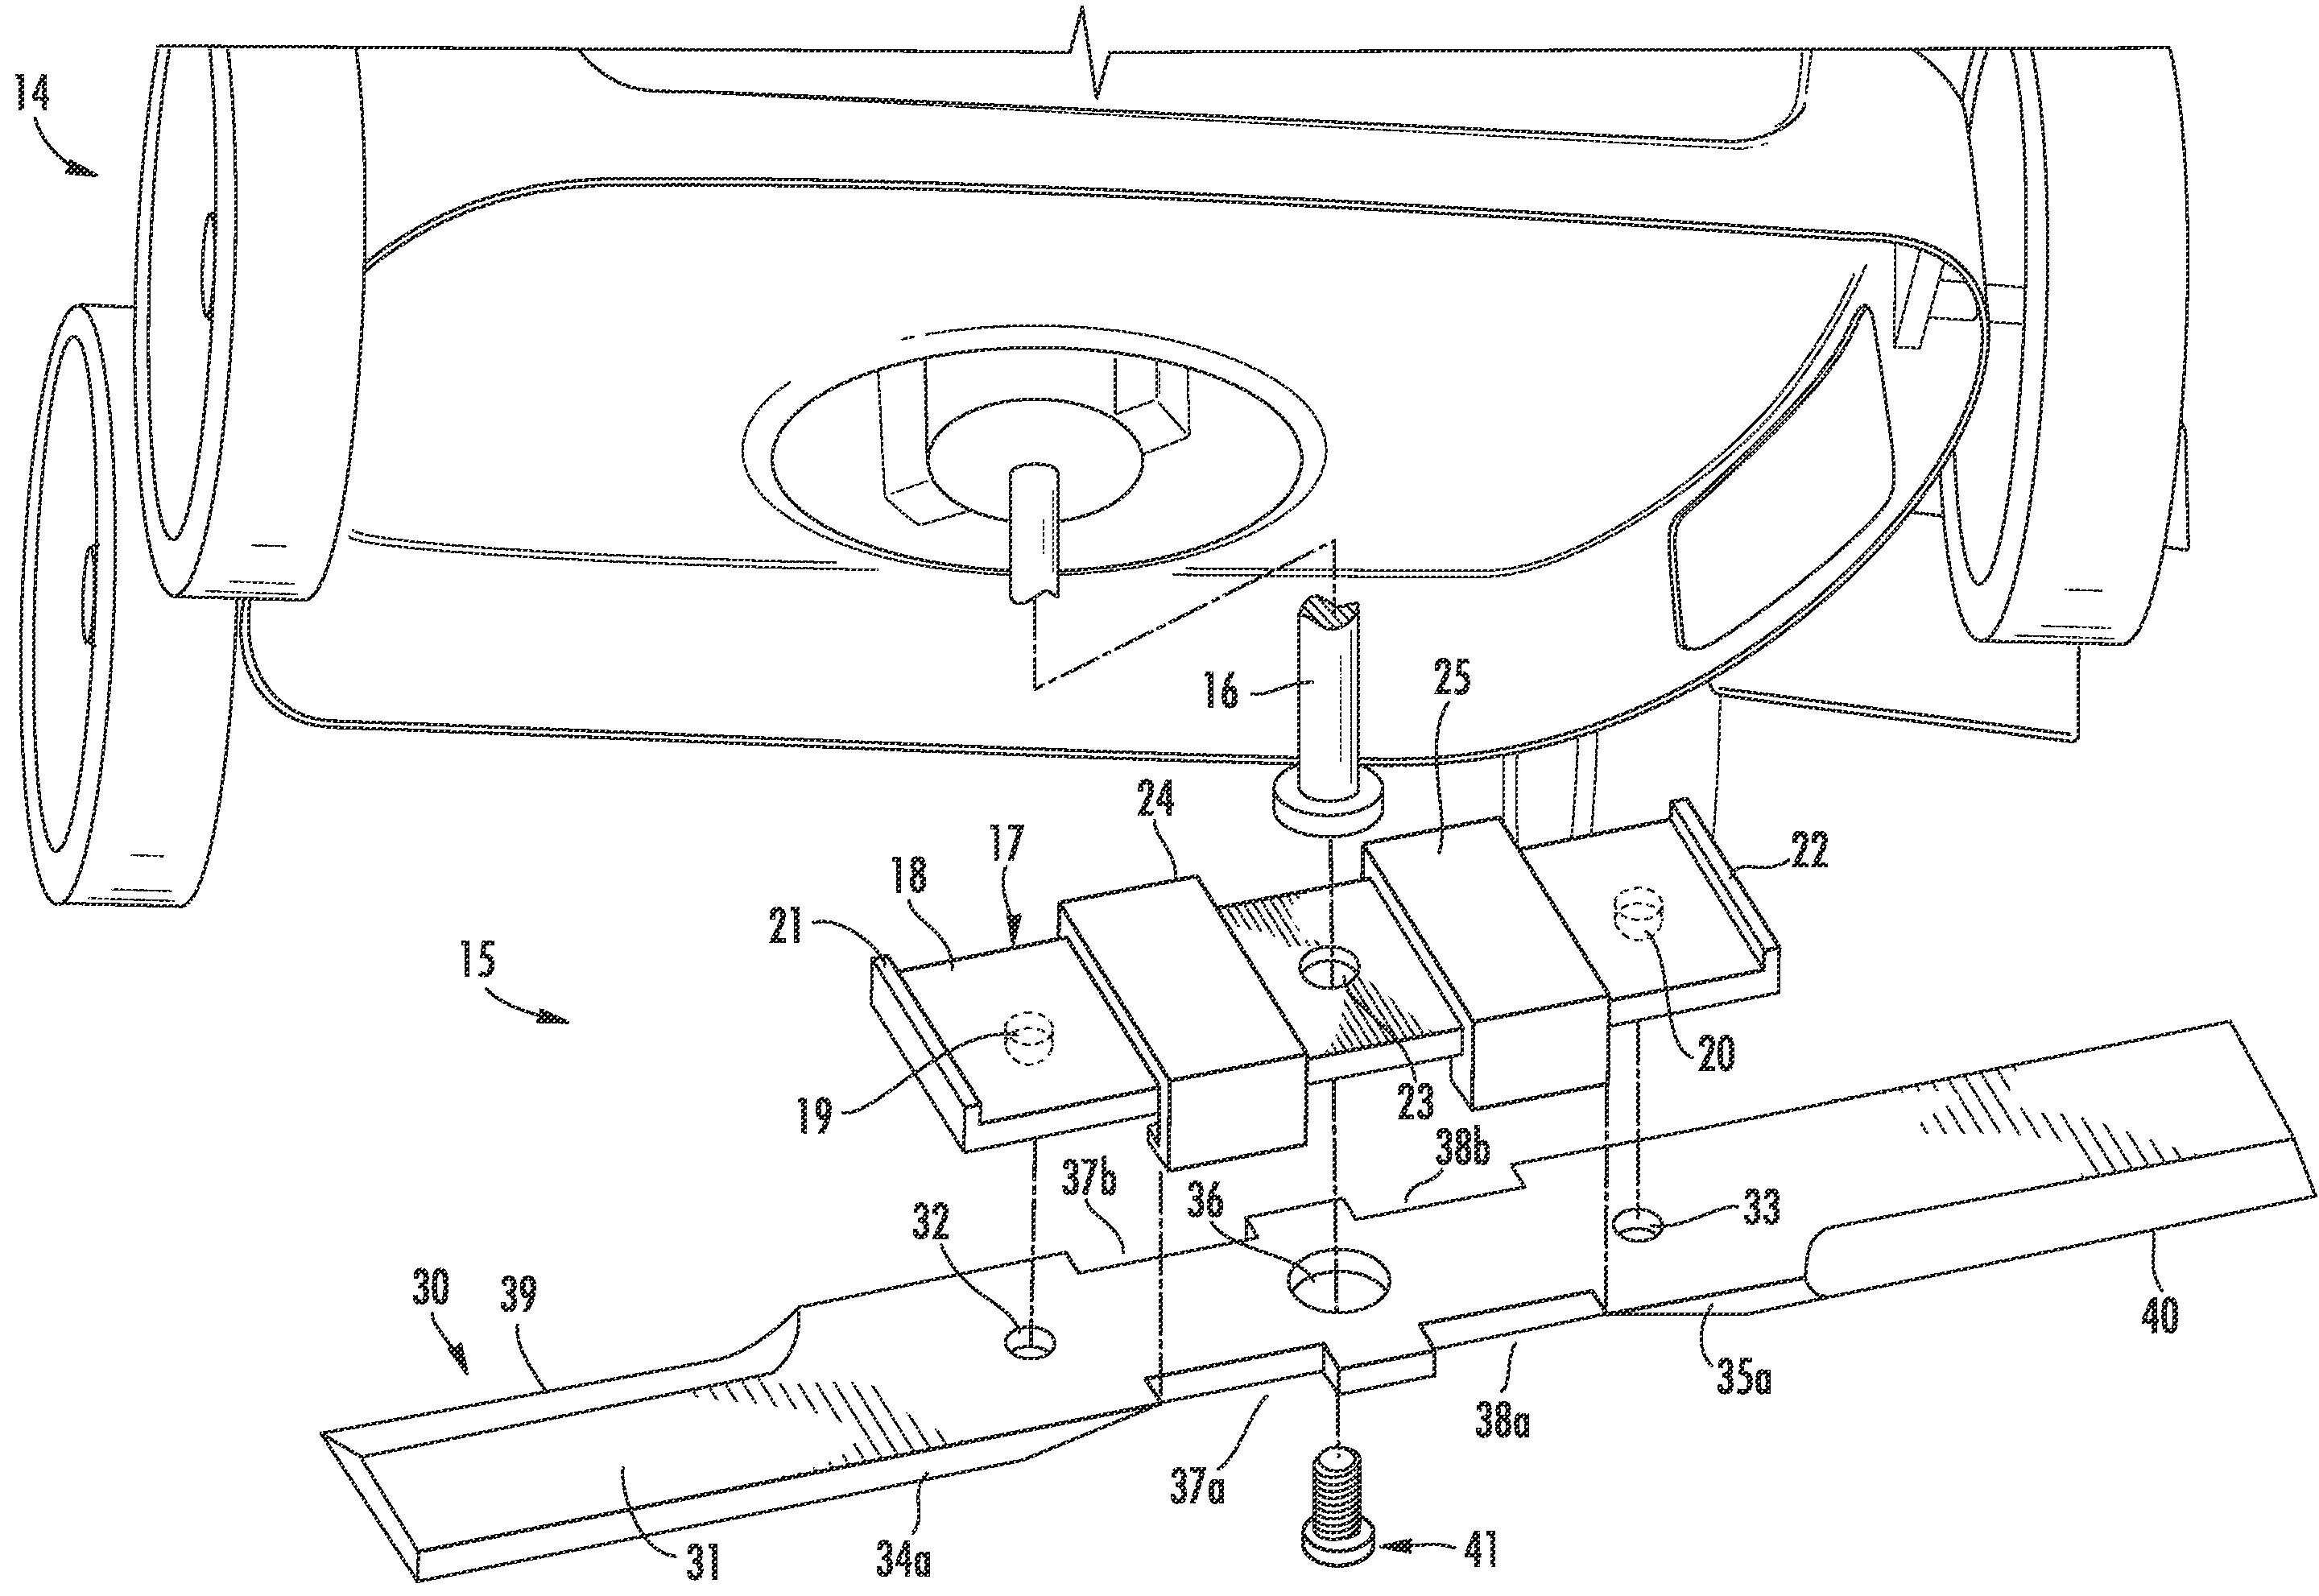 Lawn mower blade assembly having blade mount for quick blade replacement and associated methods